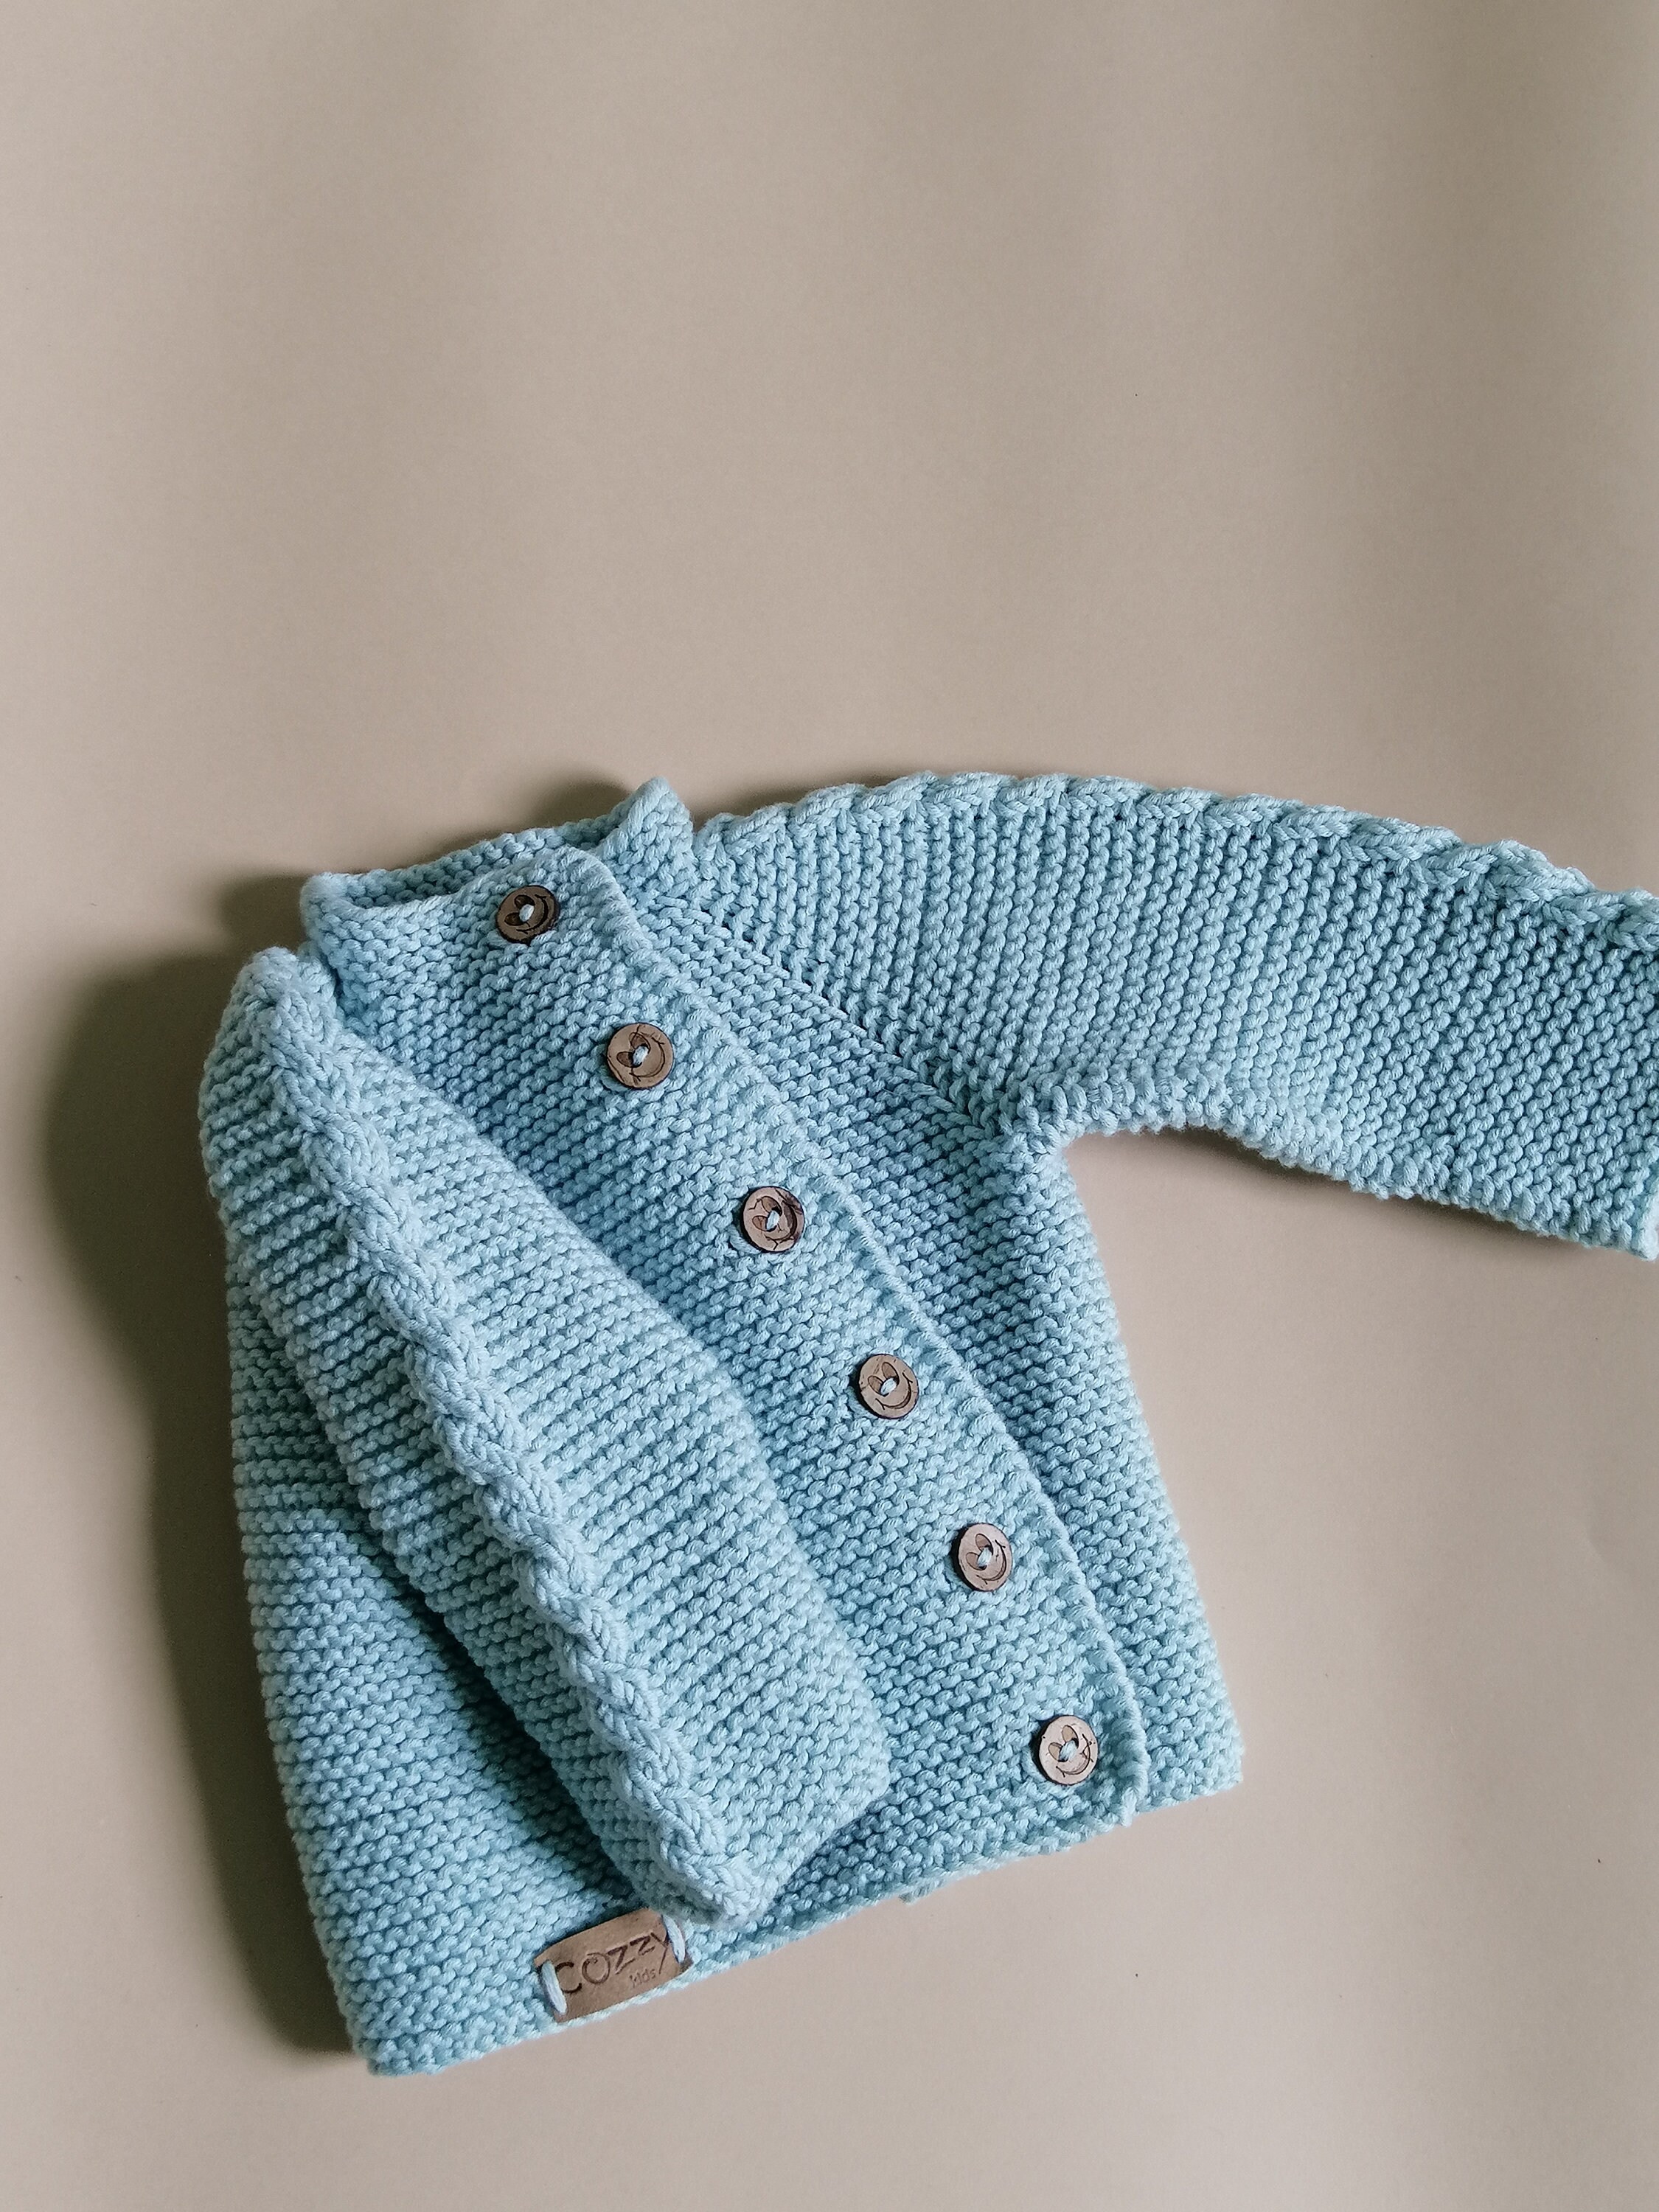 Merino and cotton baby sweater knitted baby cardigan preemie | Etsy